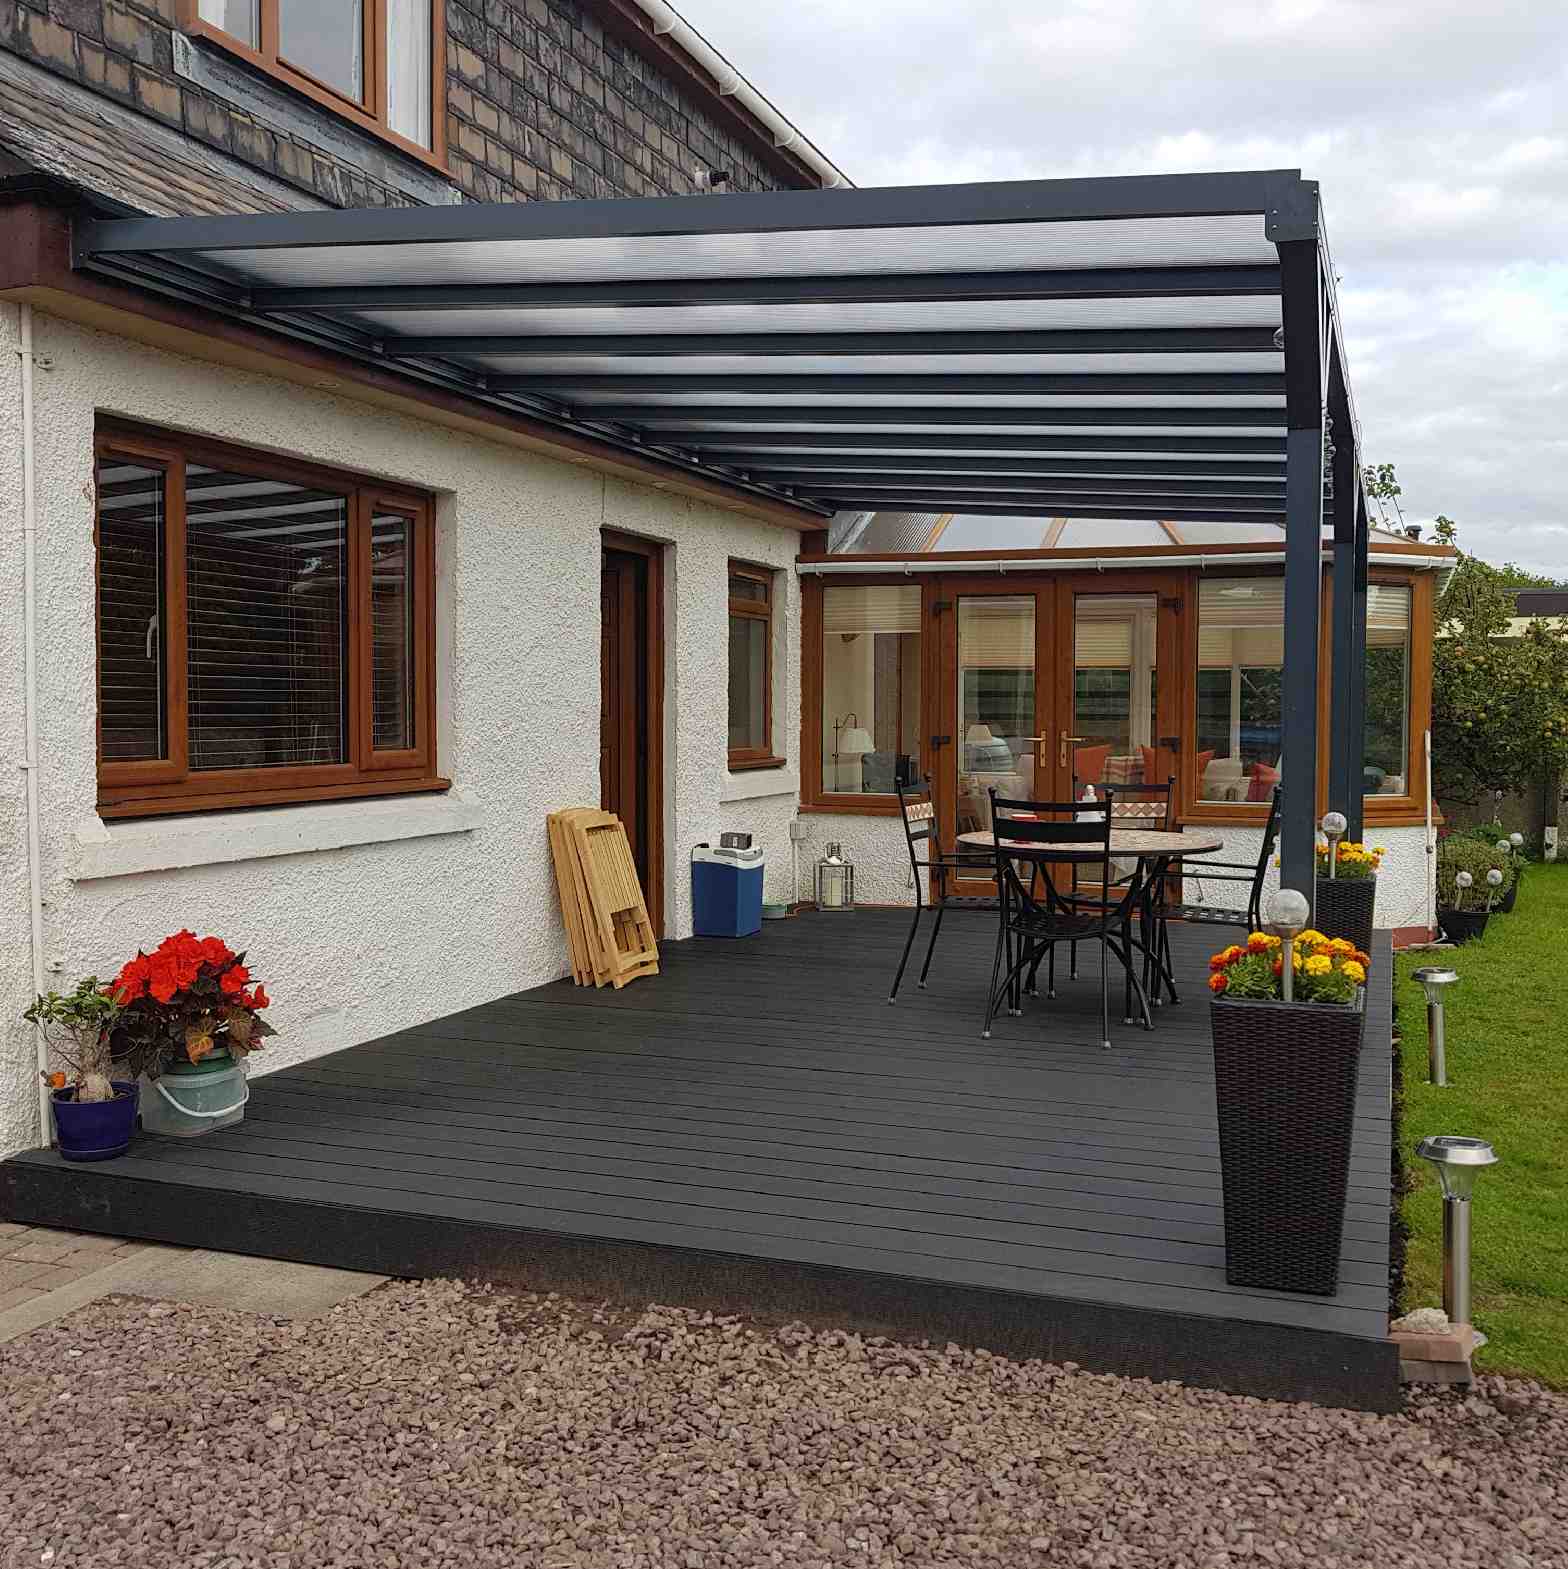 Buy Omega Verandah, Anthracite Grey, 16mm Polycarbonate Glazing - 11.6m (W) x 2.0m (P), (5) Supporting Posts online today